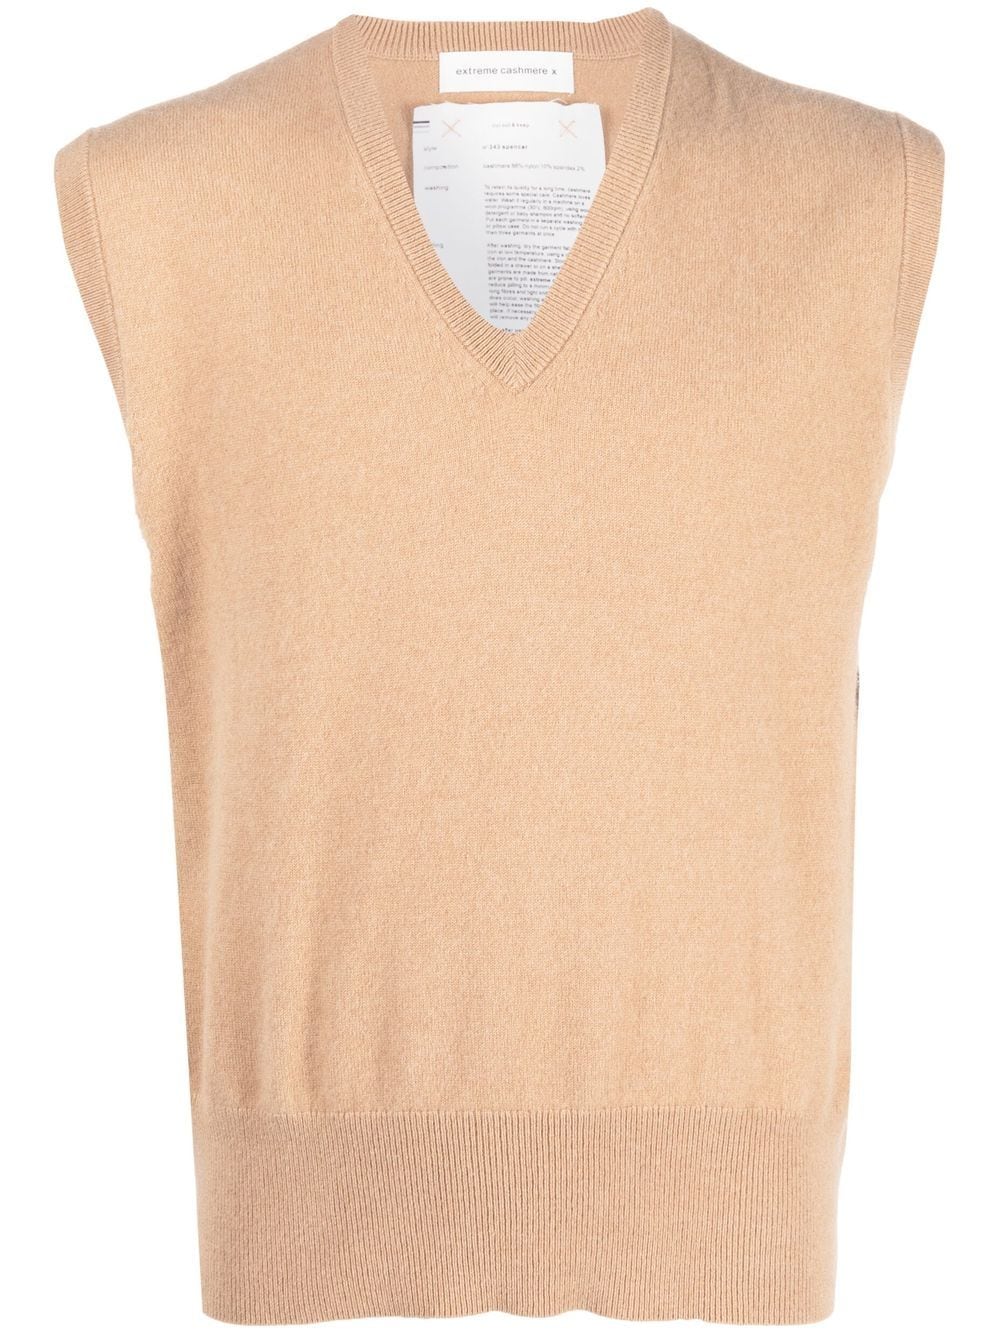 Extreme Cashmere V-neck Knit Waistcoat In Neutrals